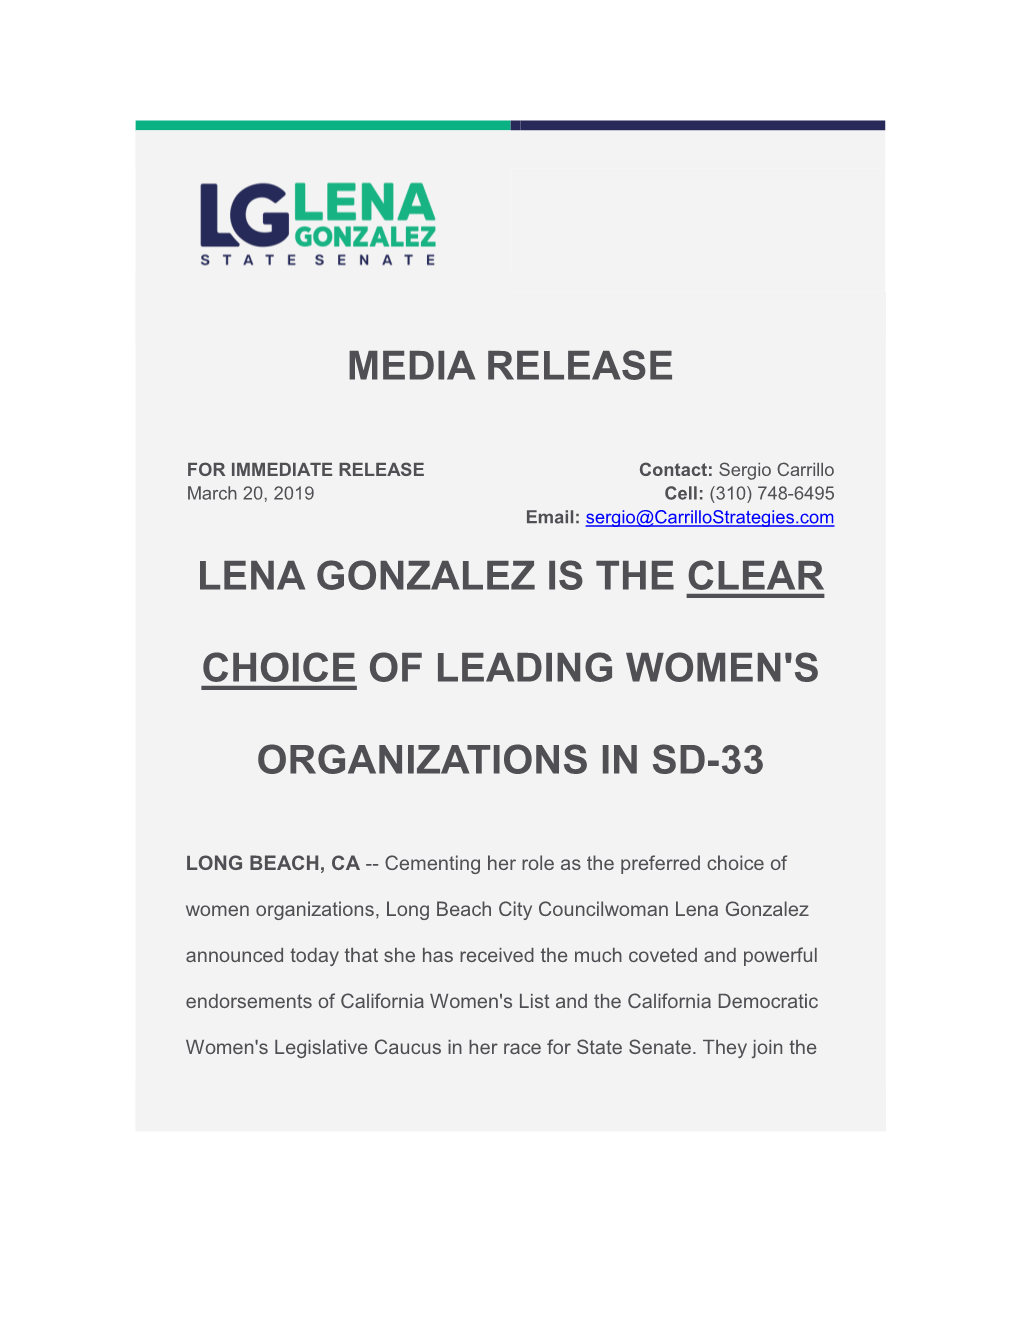 Lena Gonzalez Is the Clear Choice of Leading Women's Organizations In